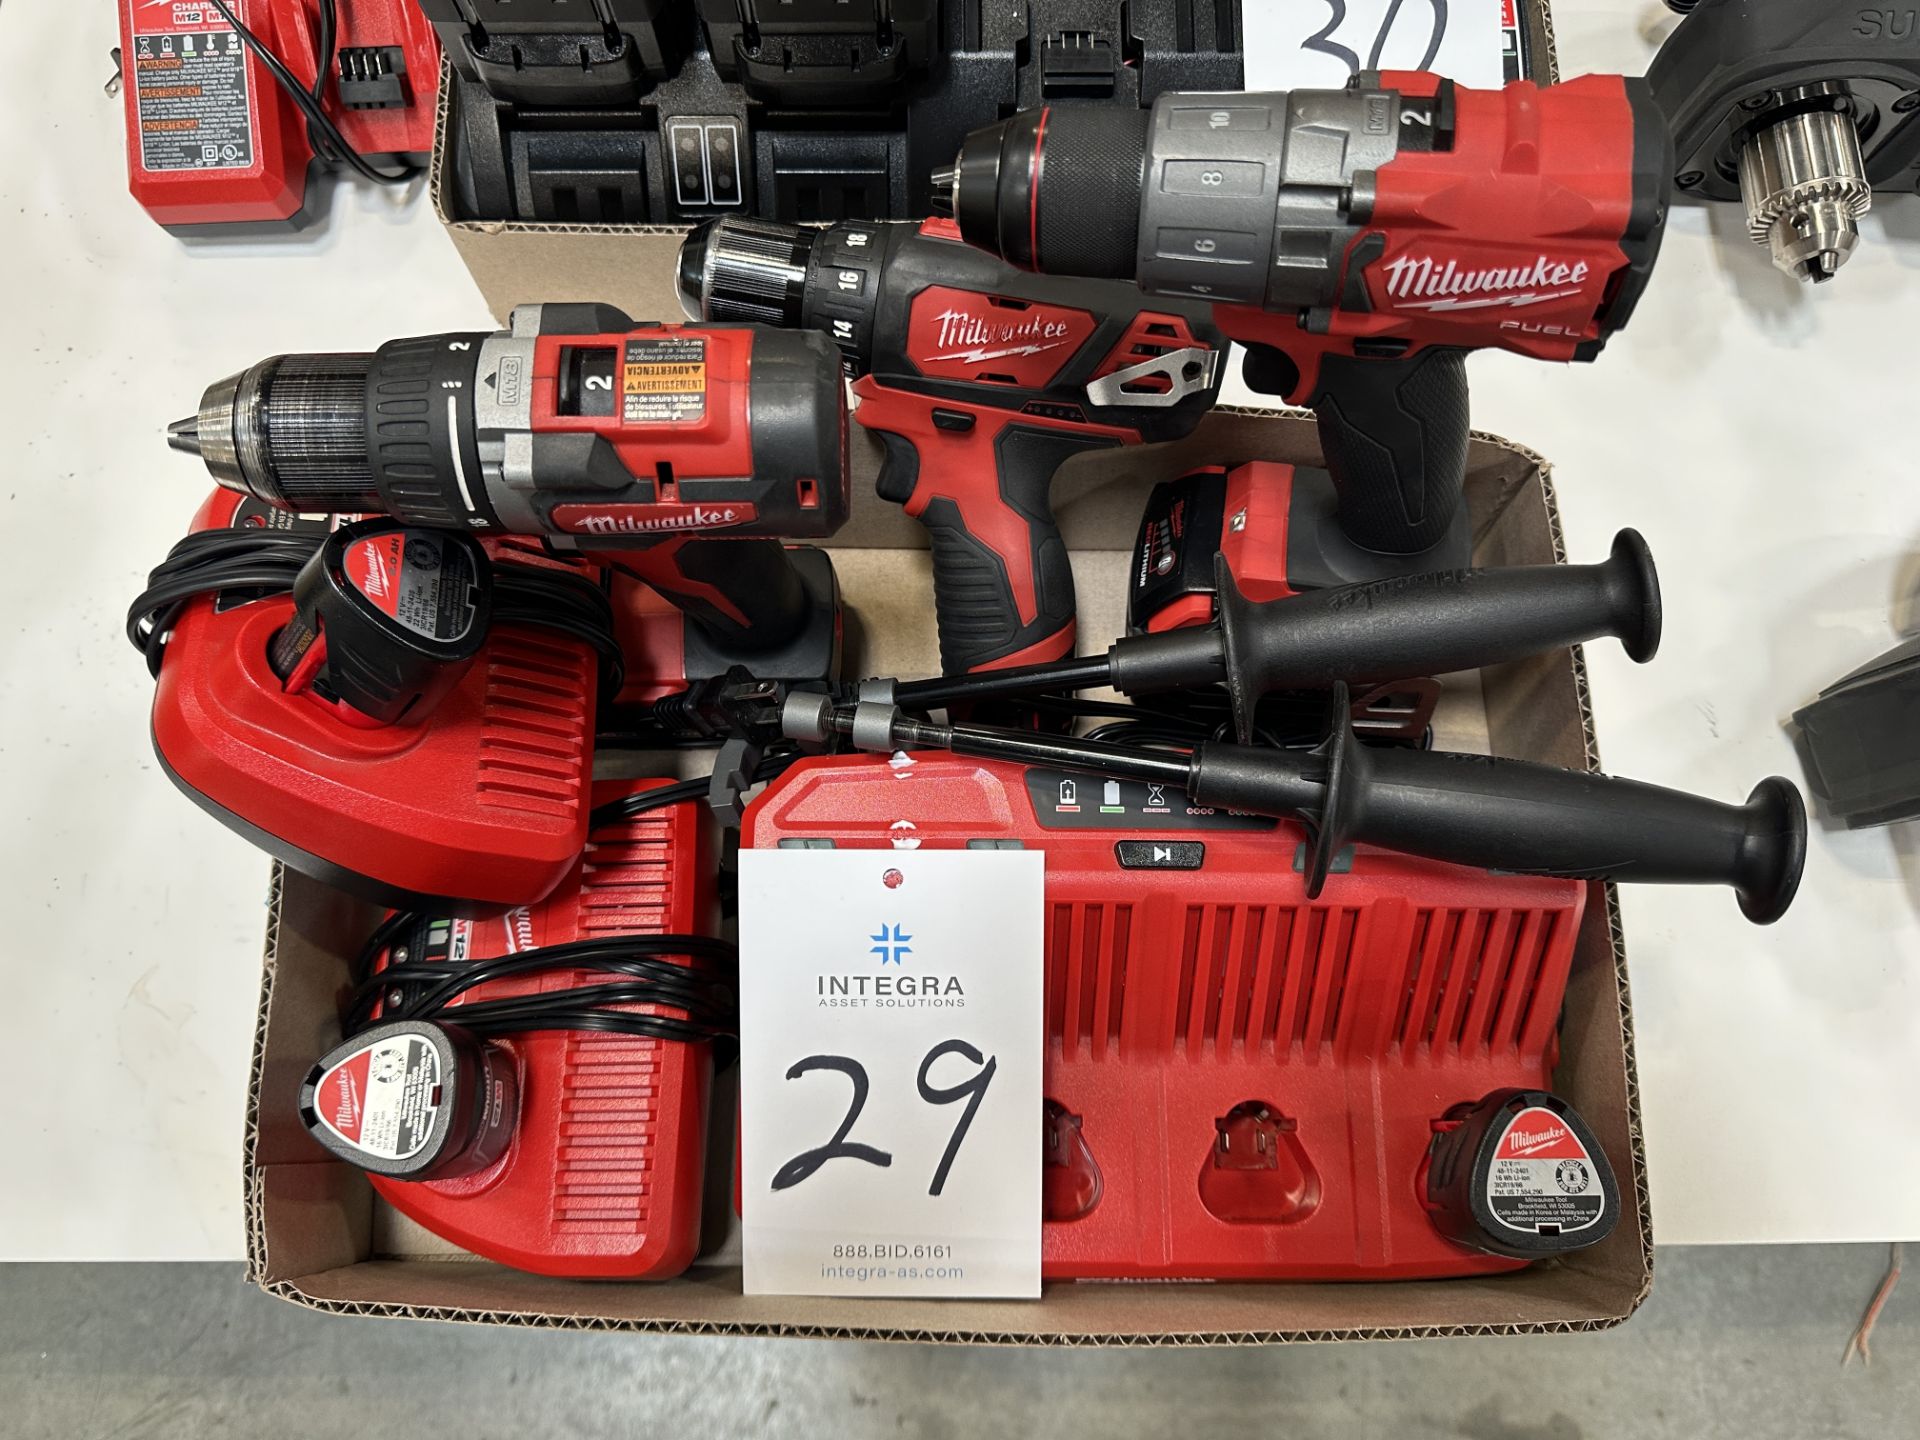 (3) Assorted Milwaukee Cordless Drivers